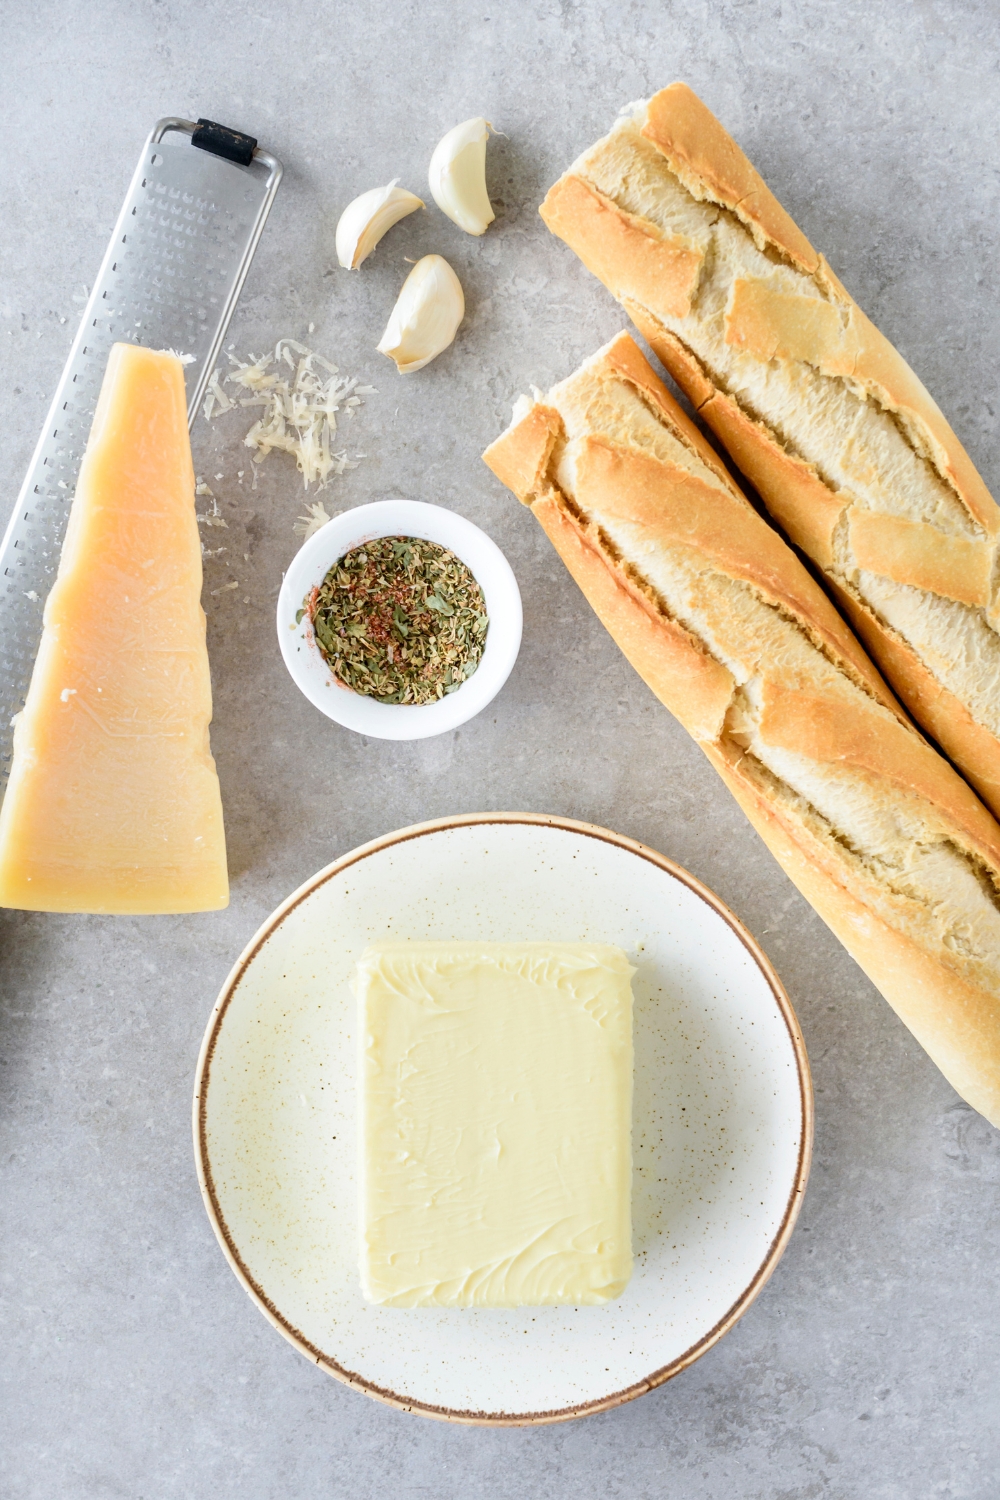 A plate of butter next to a wedge of parmesan cheese, a baguette cut in half, three garlic cloves, and a bowl of seasonings.